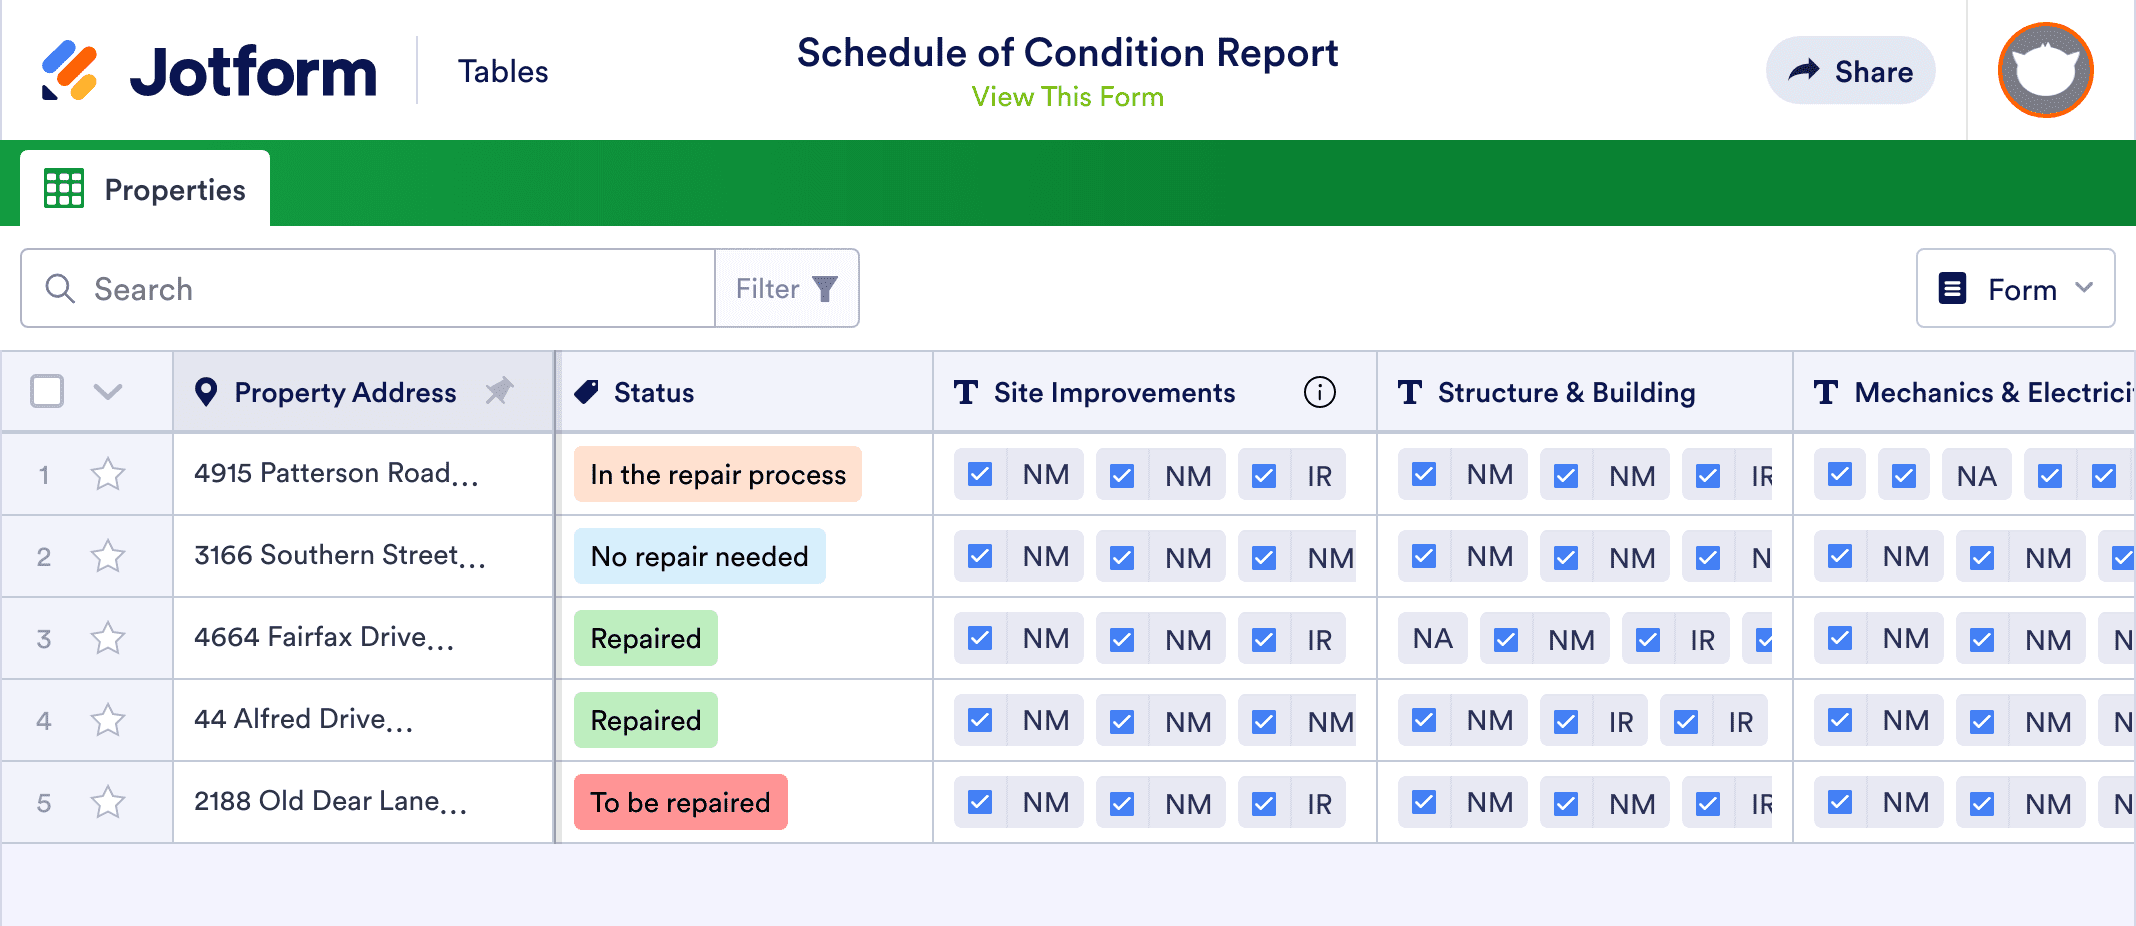 Schedule of Condition Report